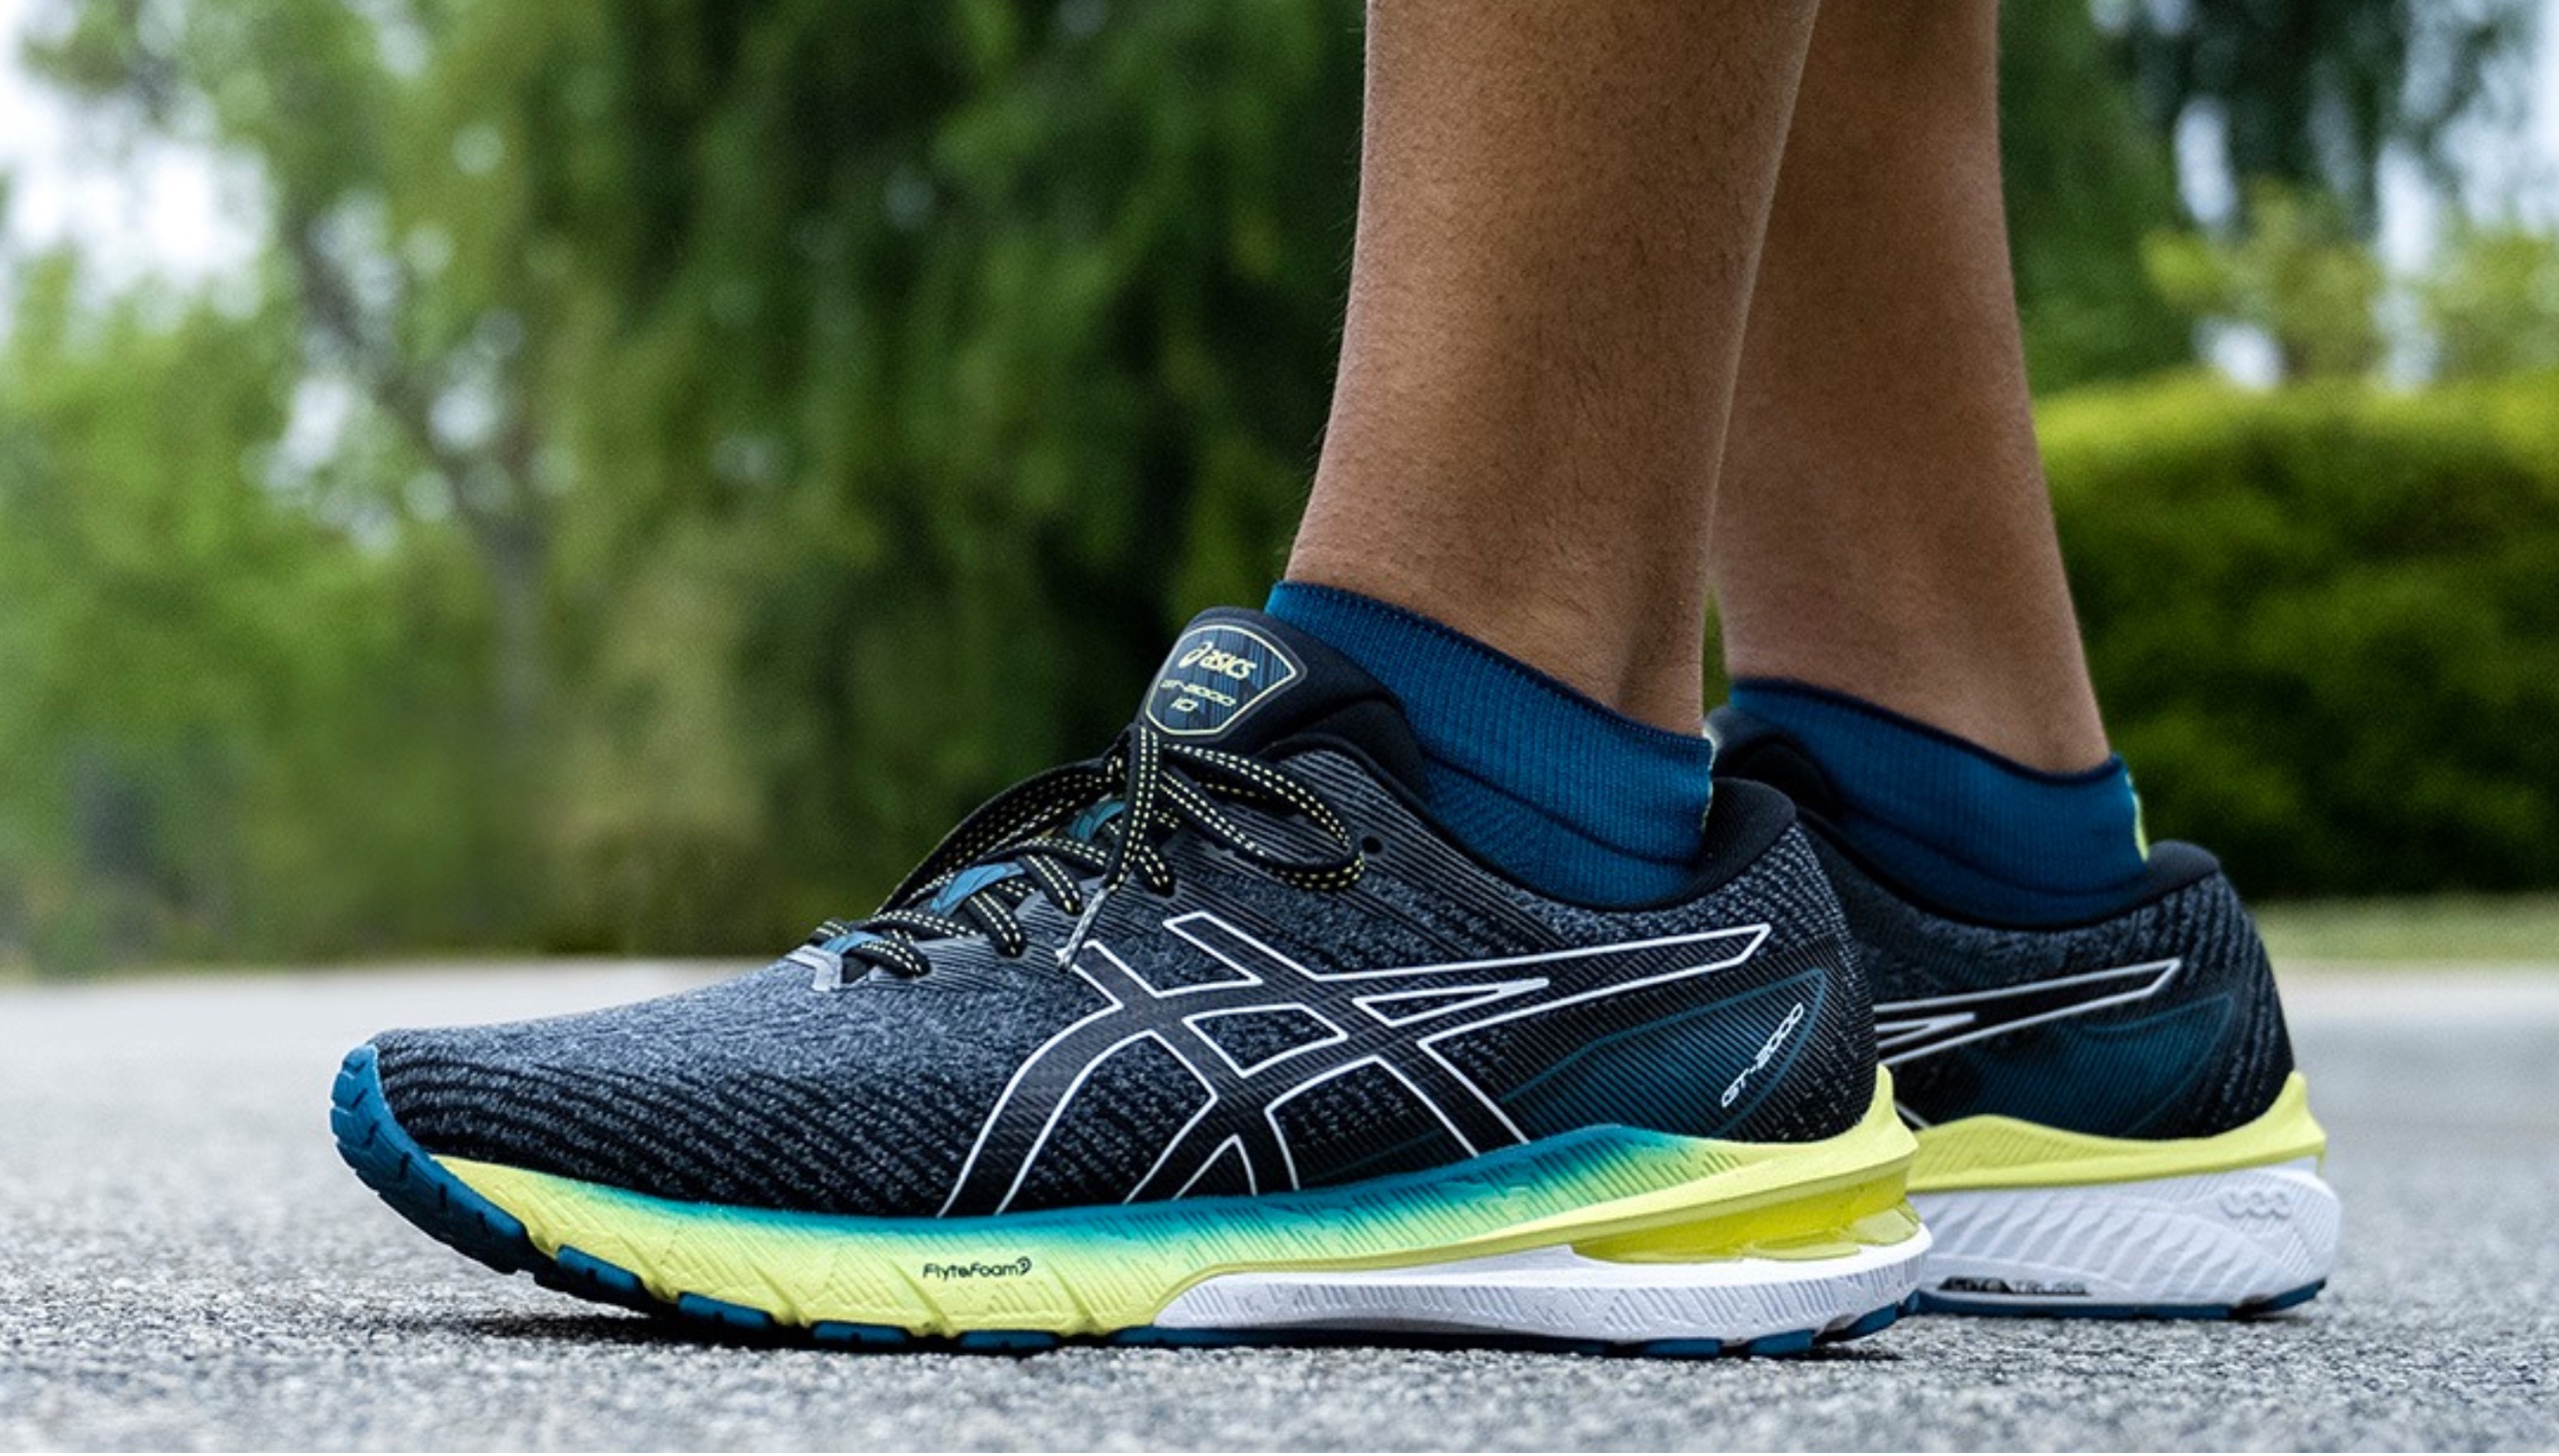 seco Aislar director ASICS Semi-Annual Sale takes up to 60% off and extra 25% off select styles